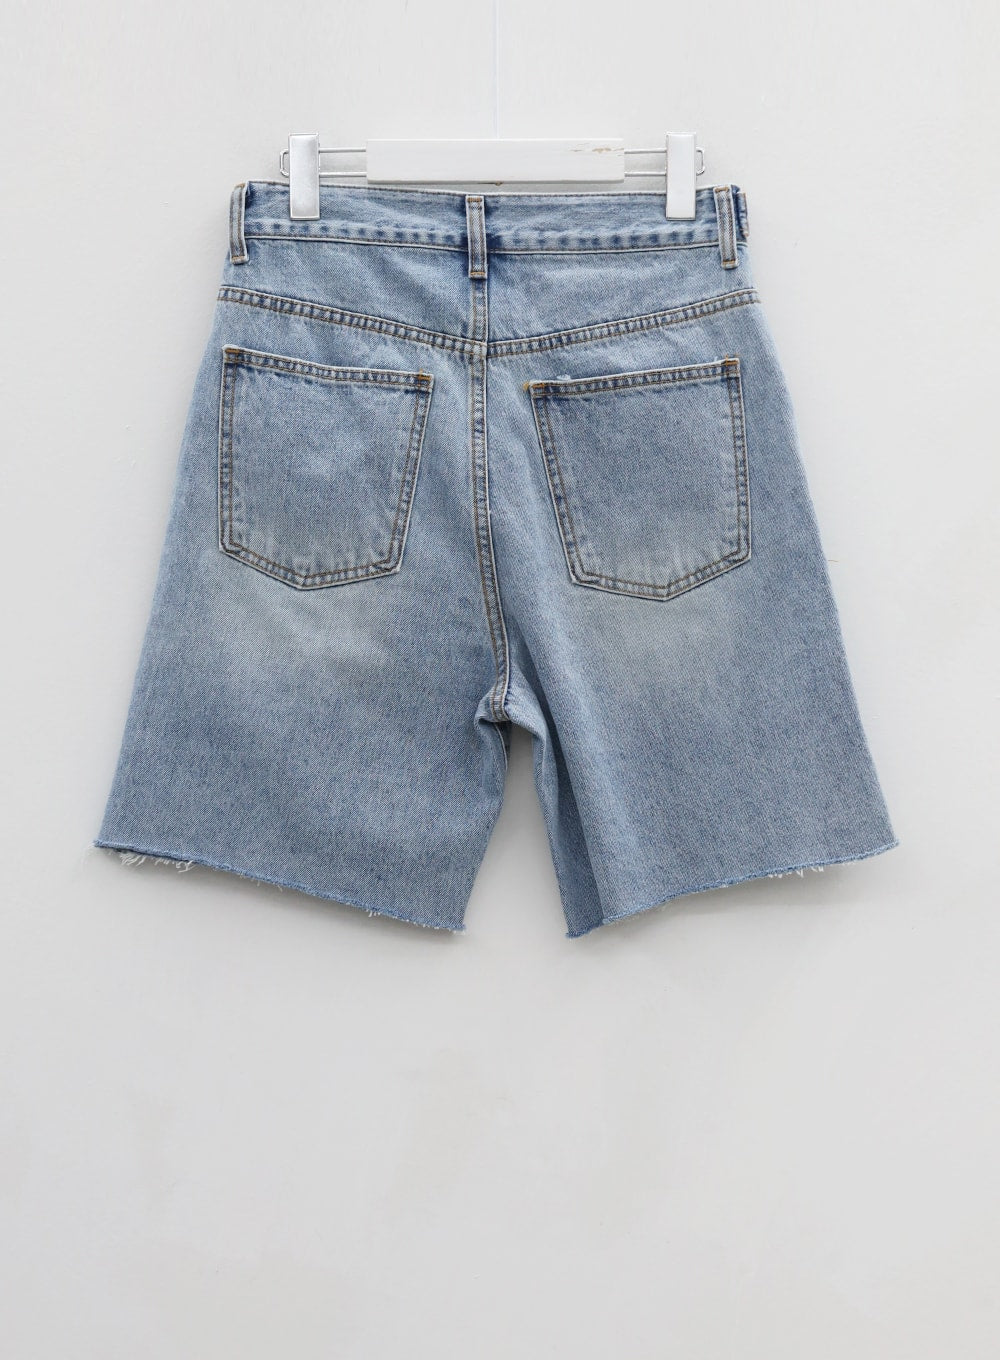 How to Cut Pants into Shorts • Heather Handmade